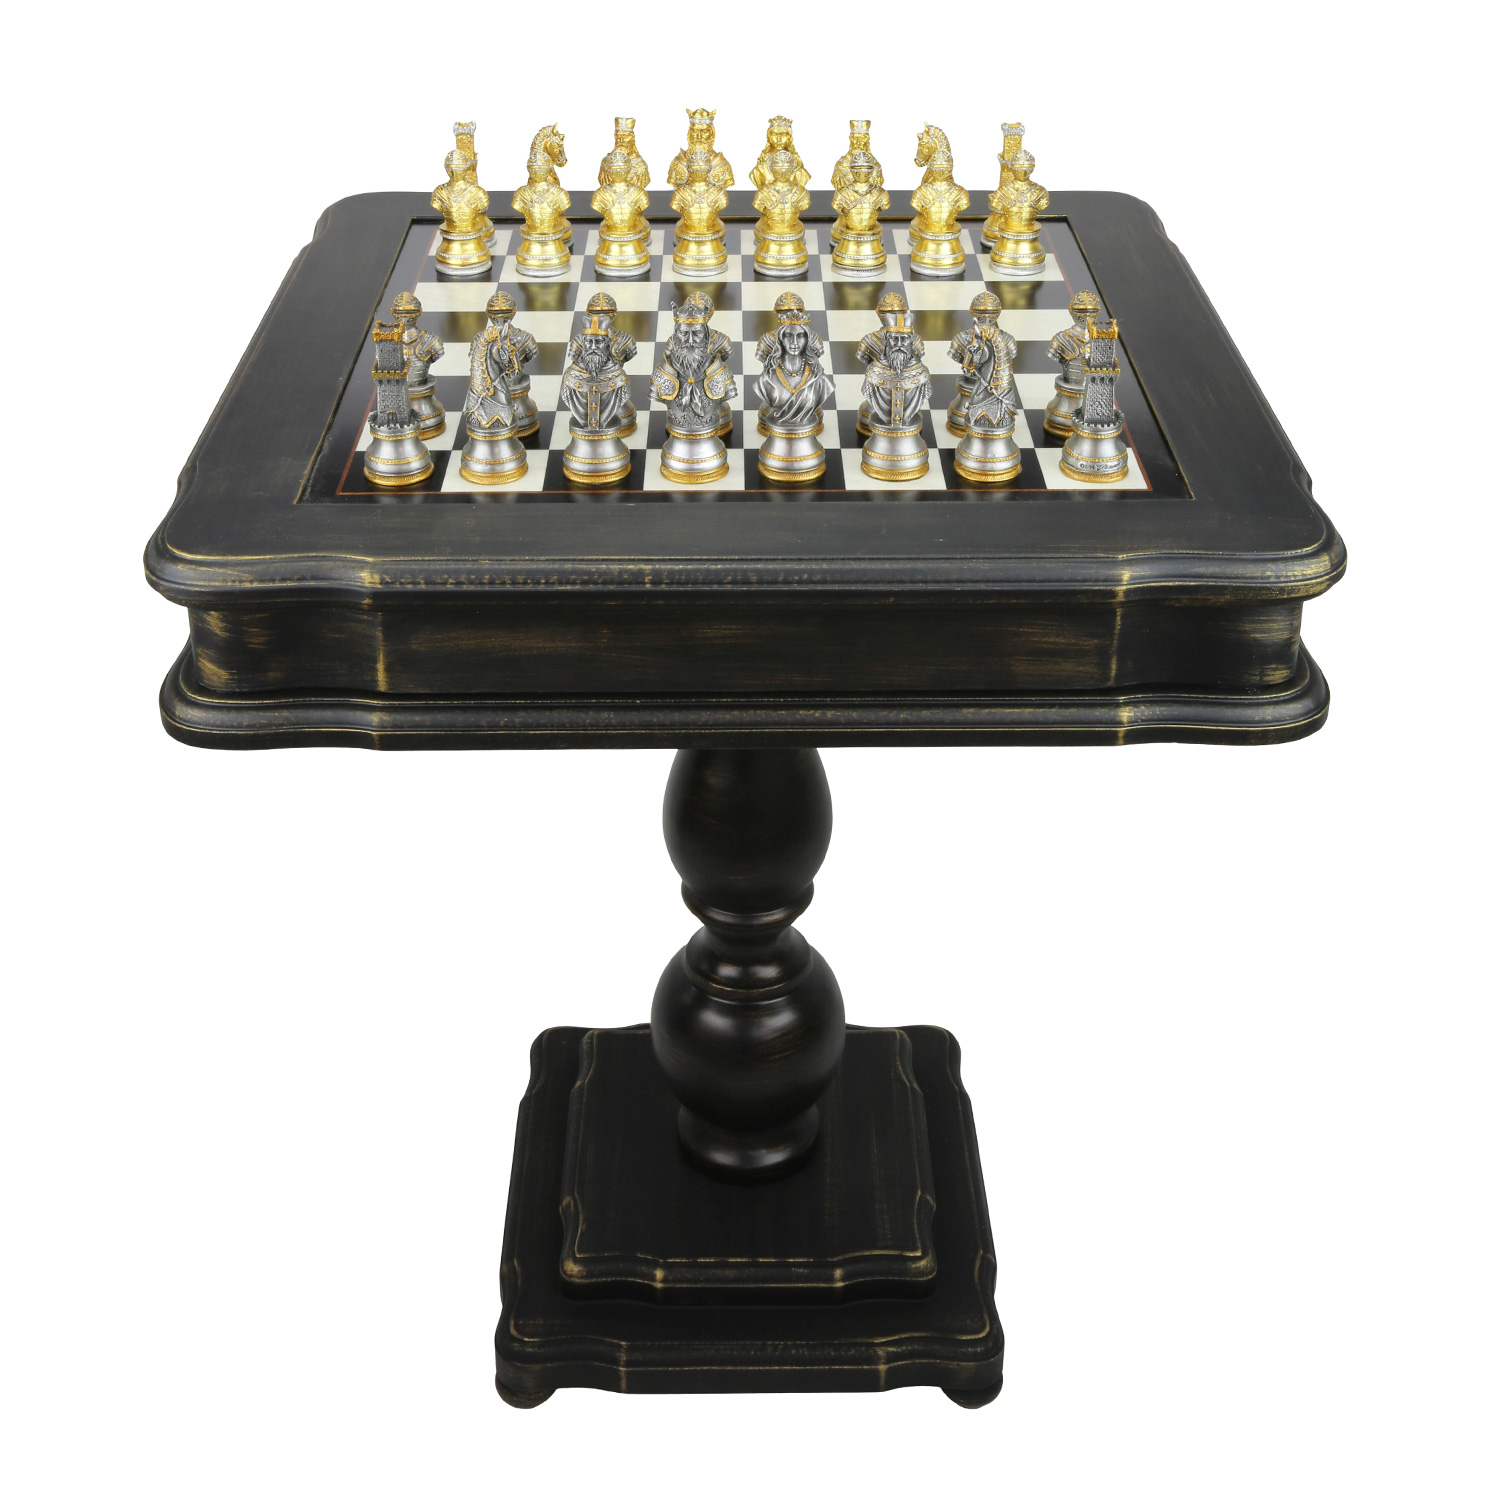 Exclusive handmade chess set Medieval 600140261 (gold/silver